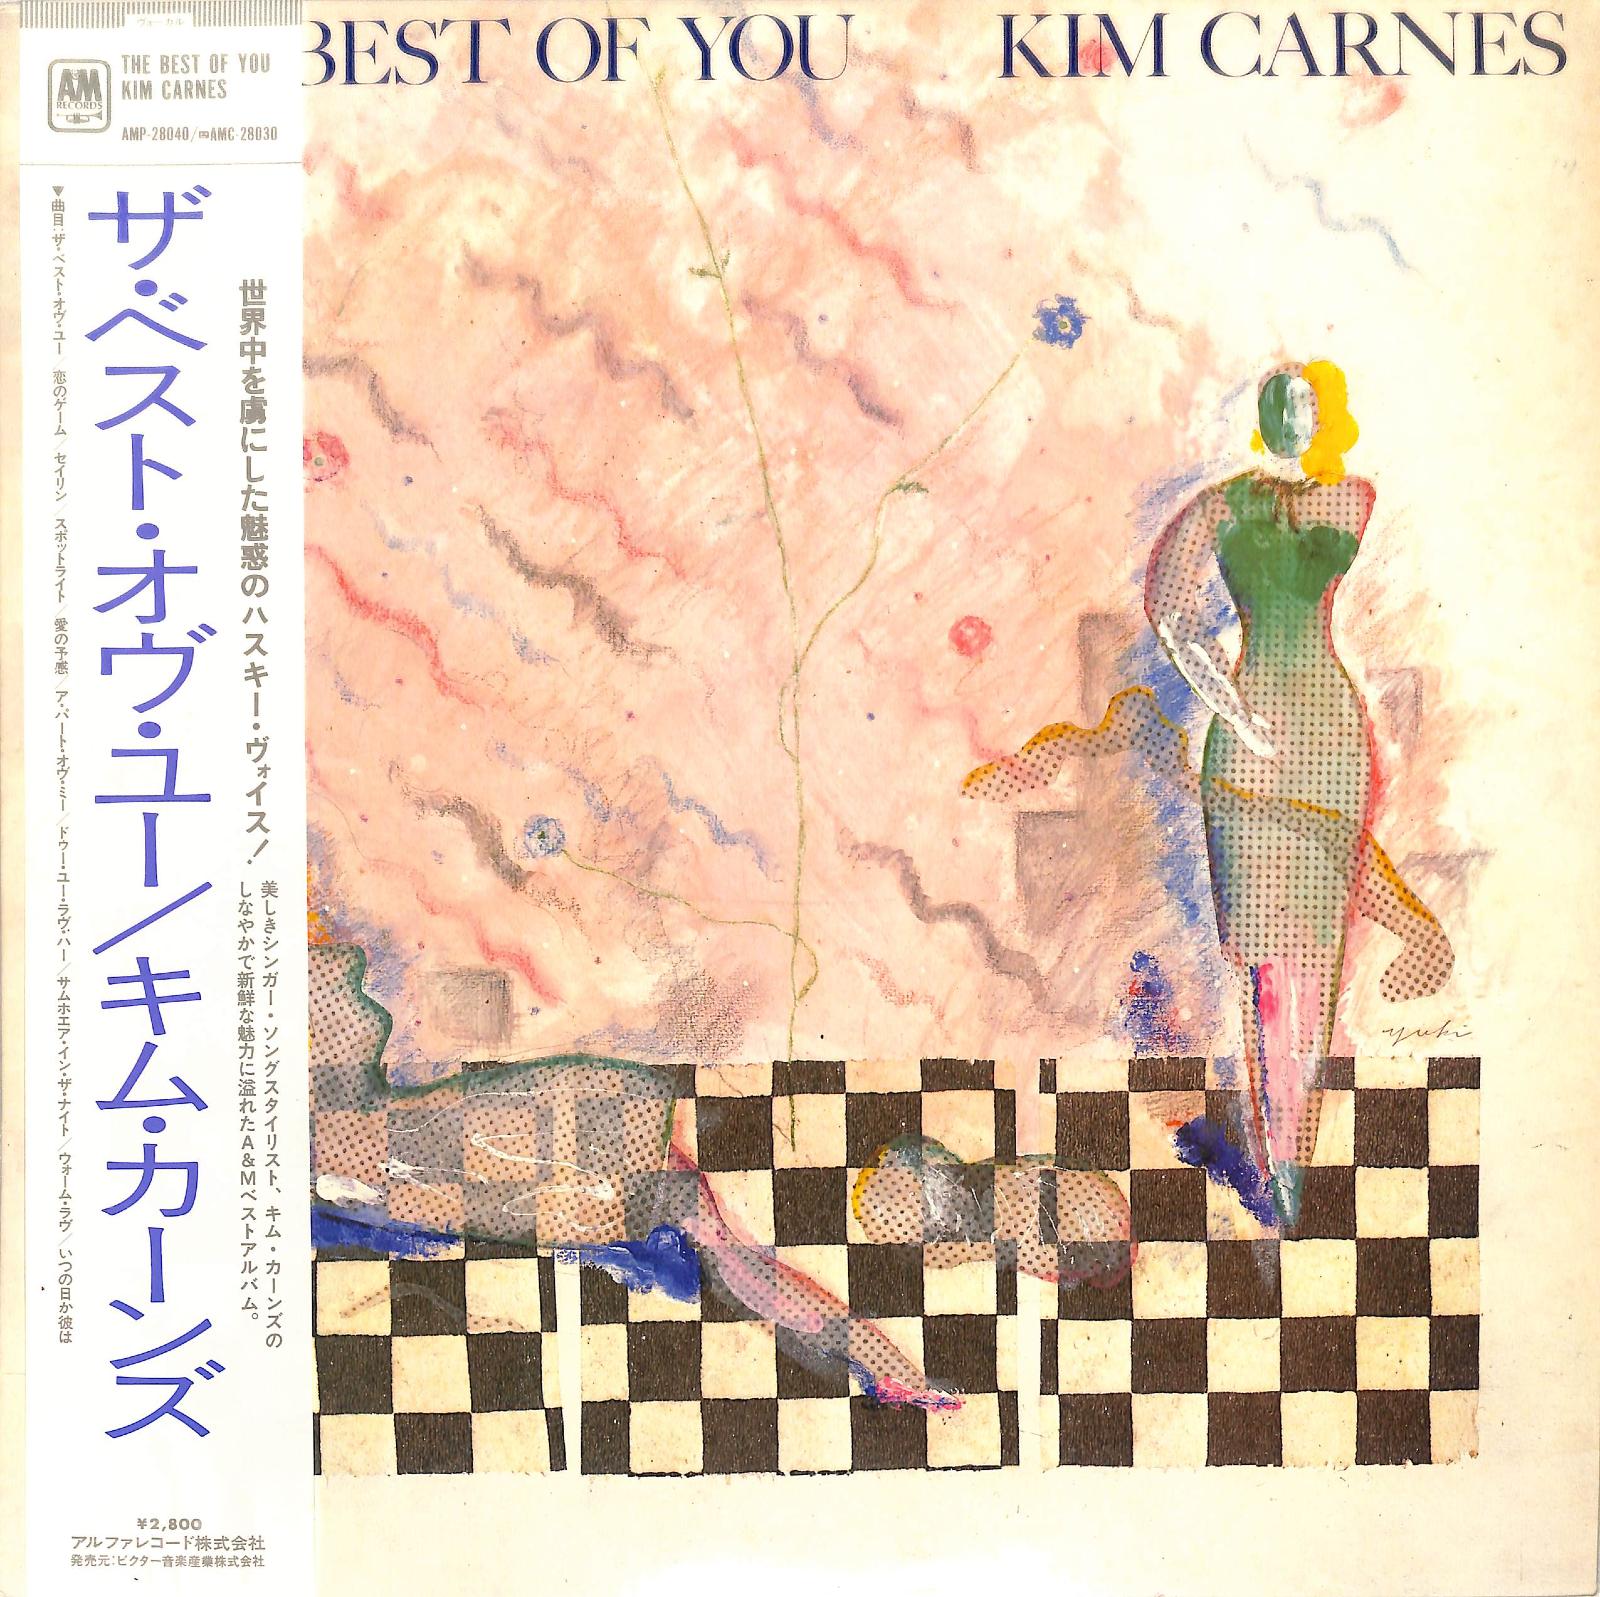 KIM CARNES - The Best Of You